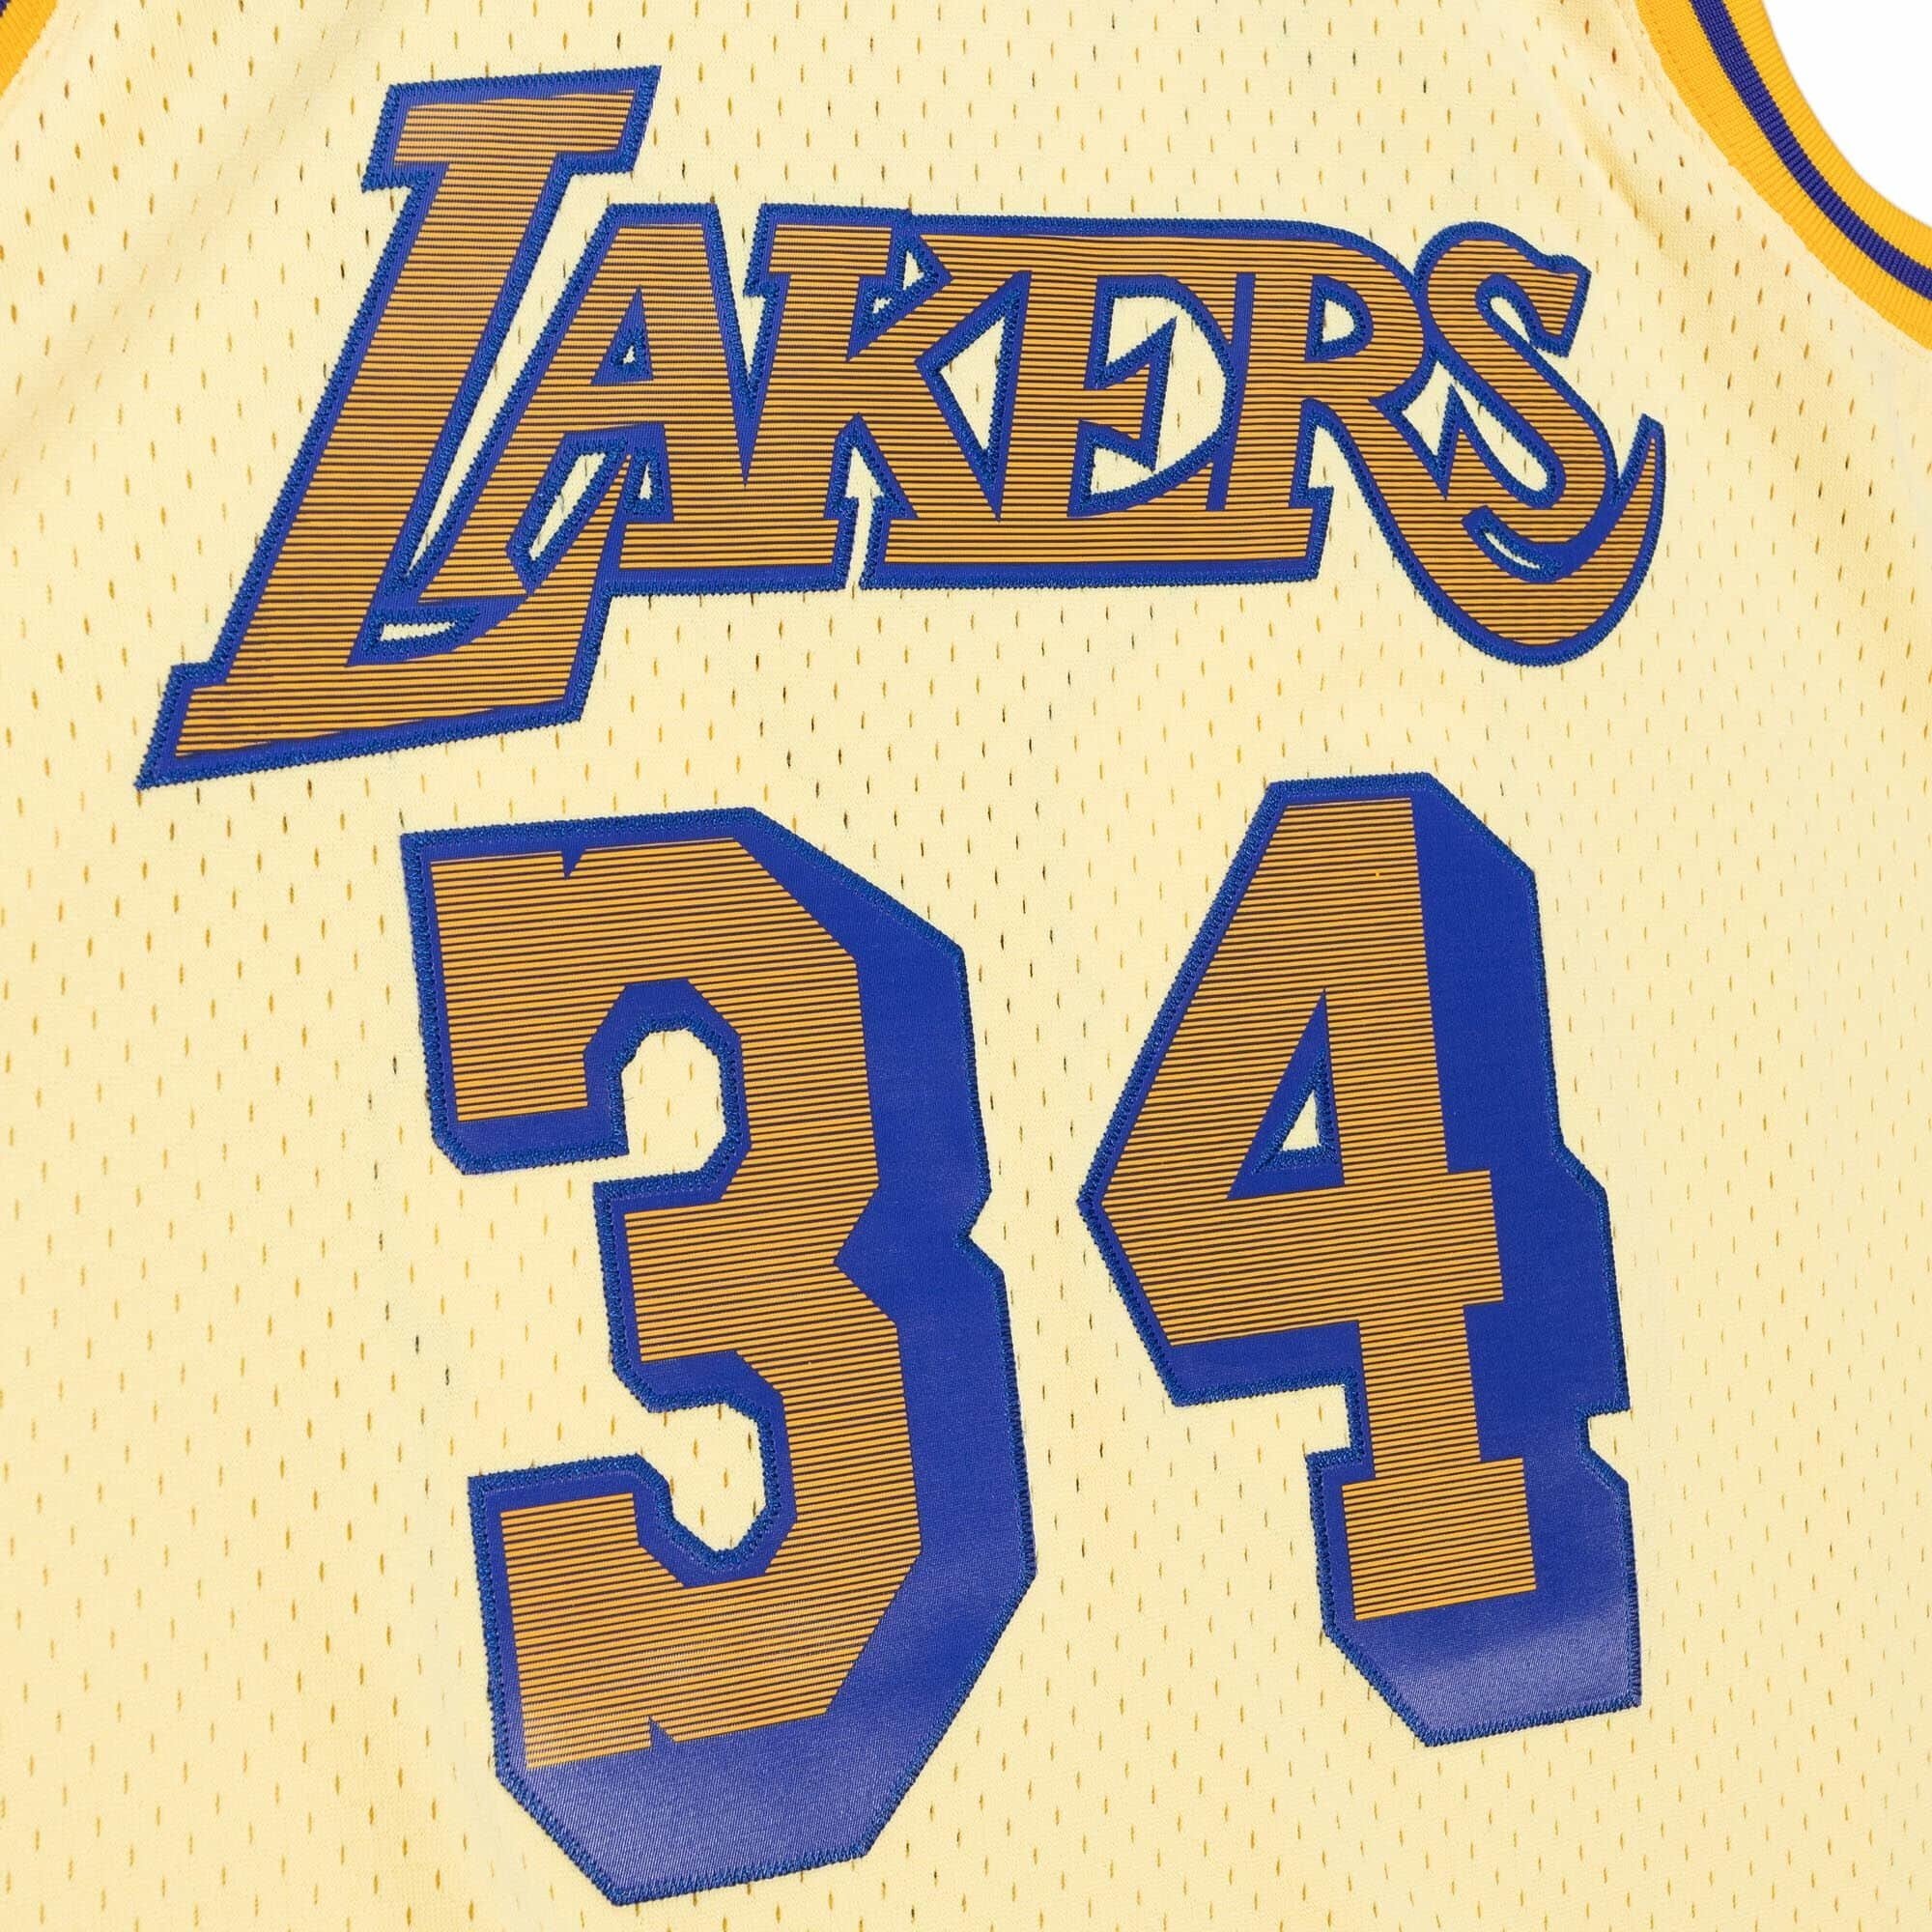 Women's Los Angeles Lakers Shaquille O'Neal Mitchell & Ness Gold